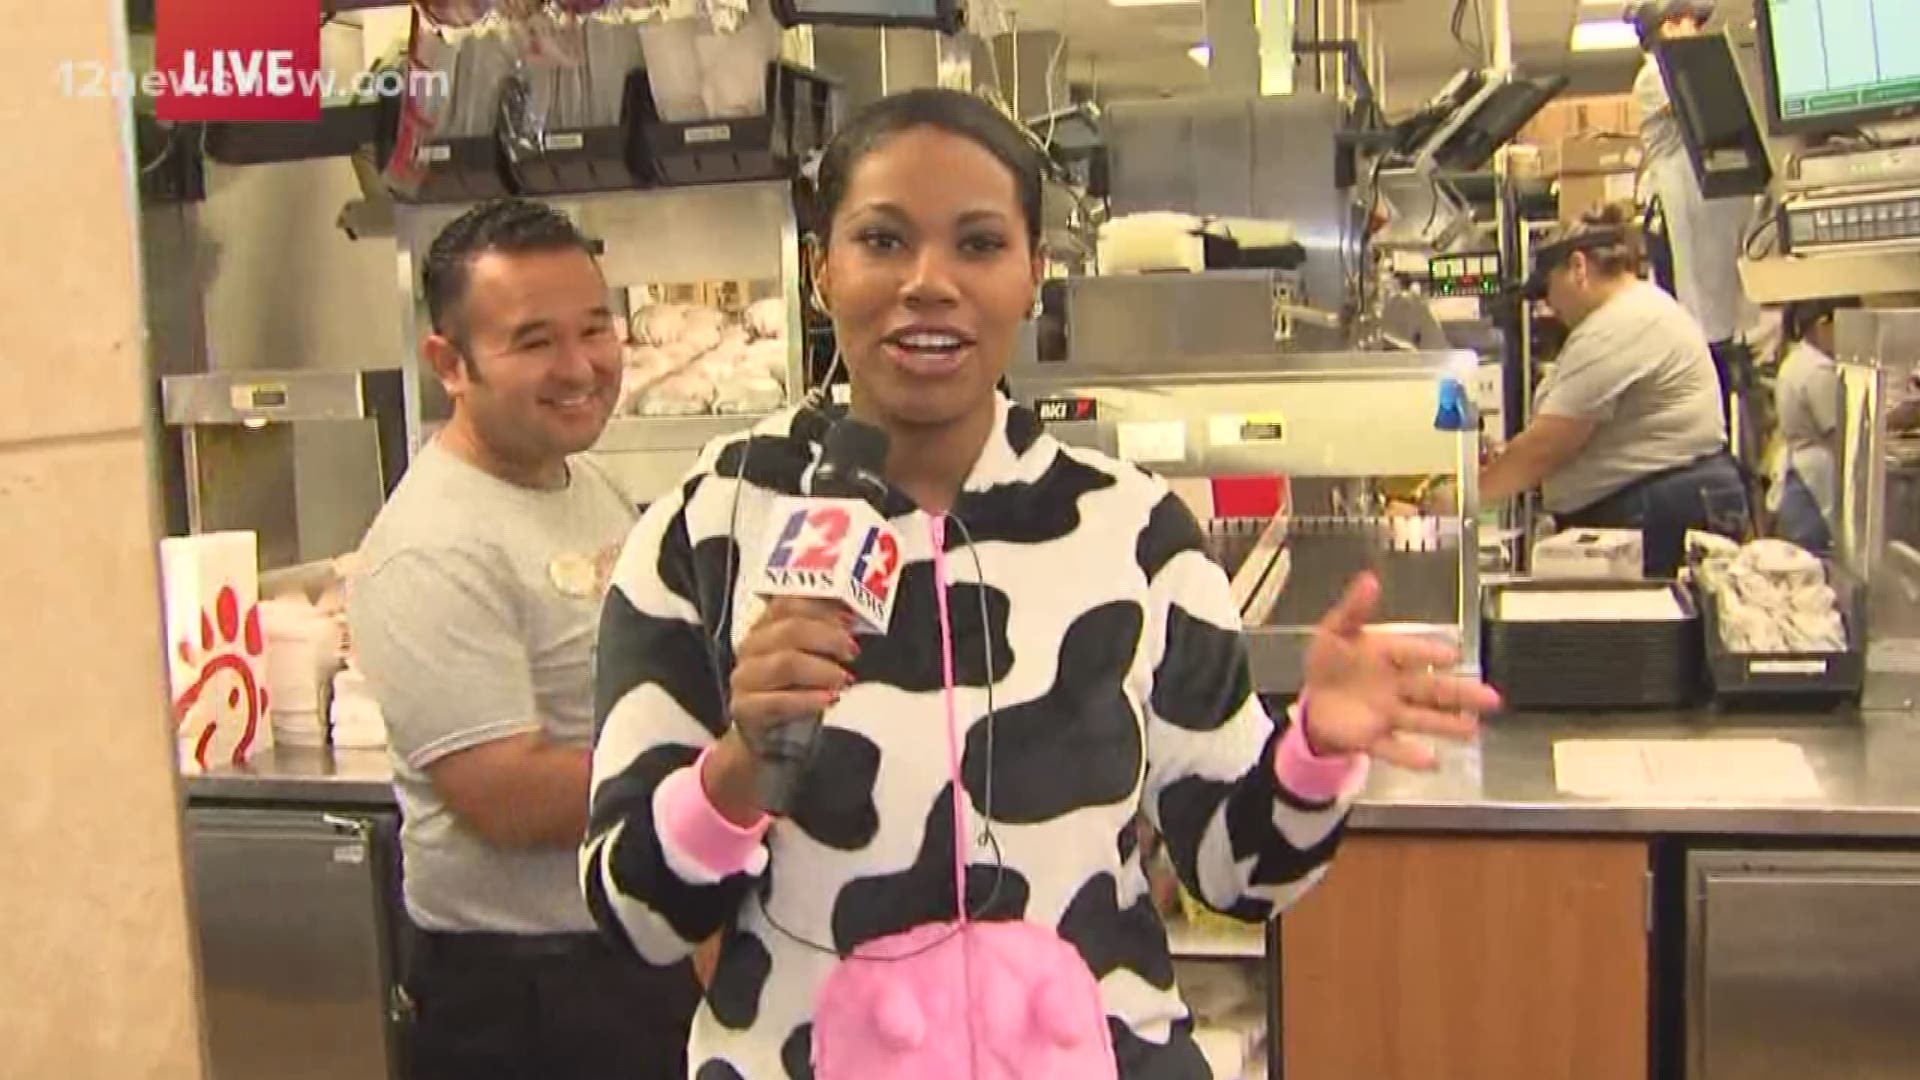 It's Cow Appreciation Day at Chick-Fil-A. 12News reporter Rachel Keller is behind the counter as the staff prepares.